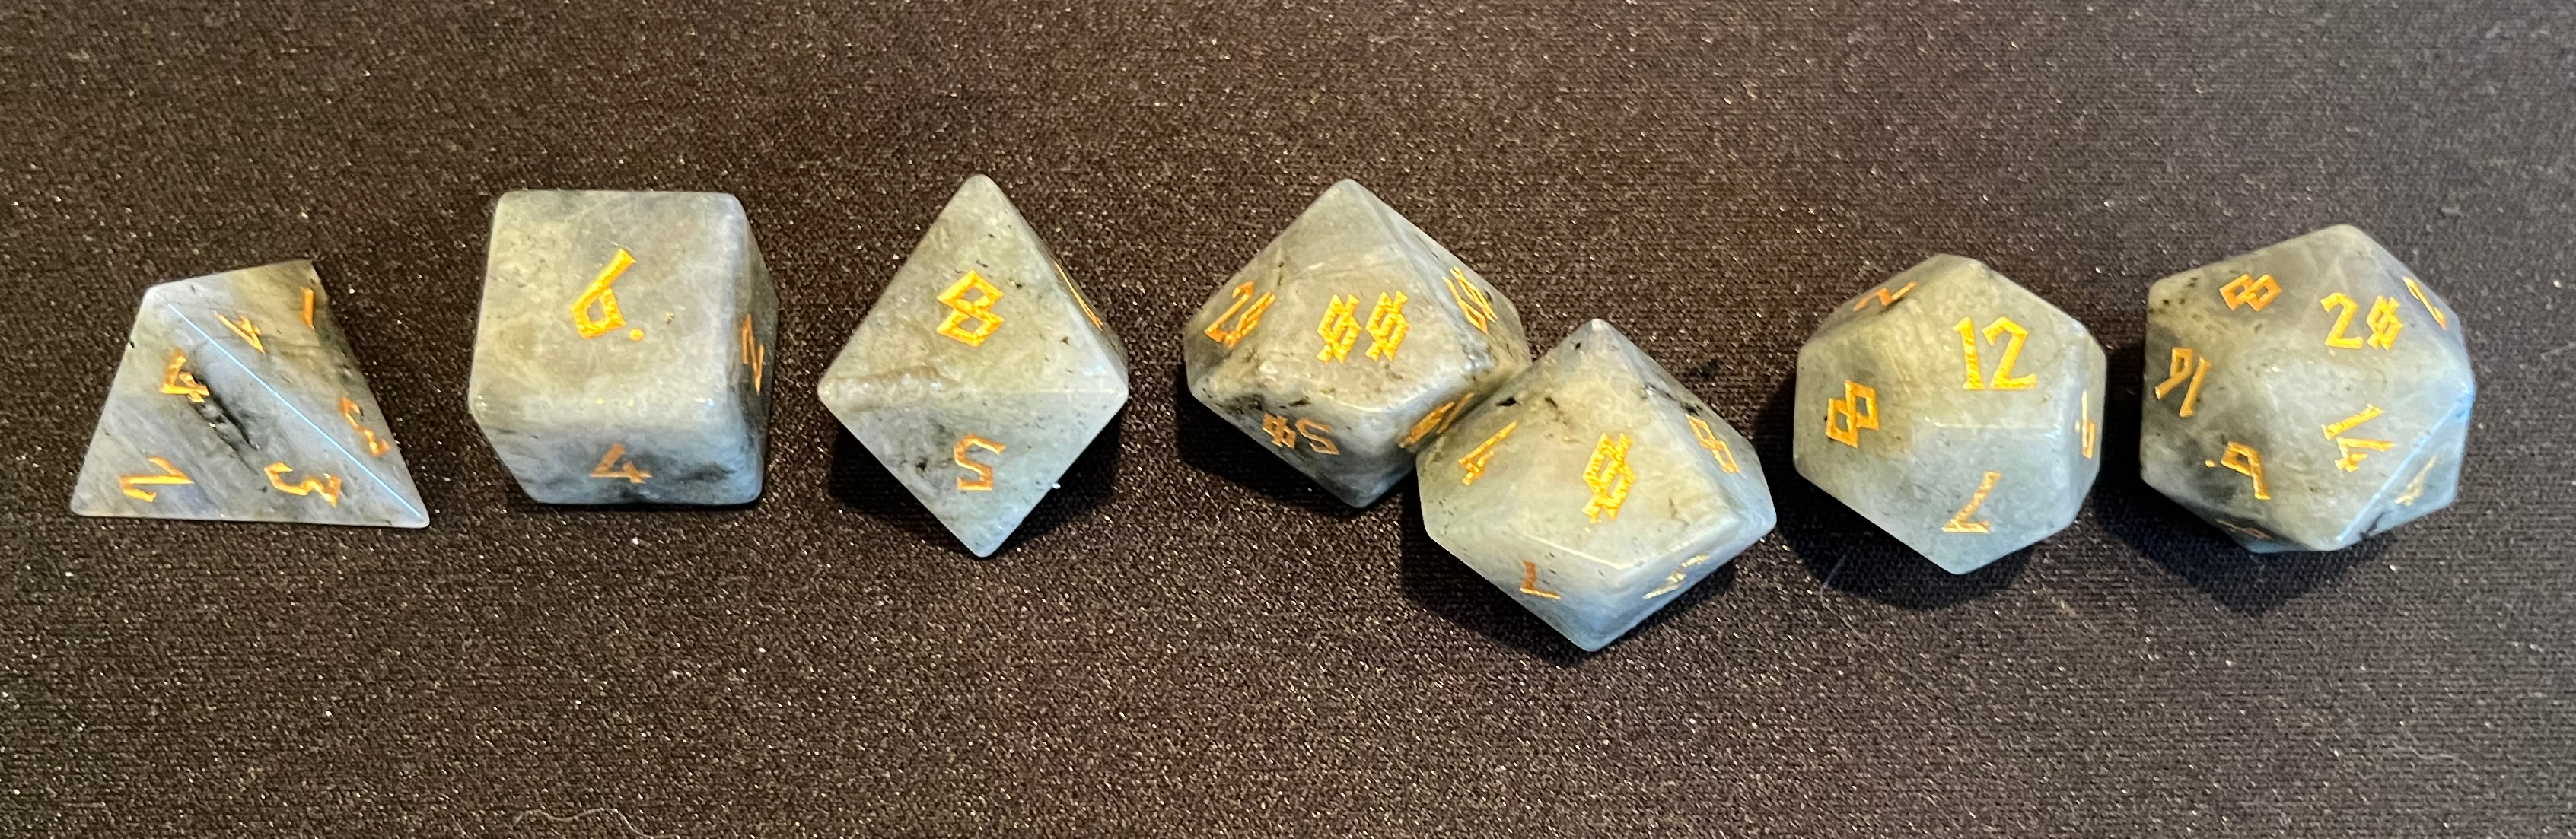 A set of 7 whitish-gray moonstone dice with gold-engraved Nordic-style font, from above.